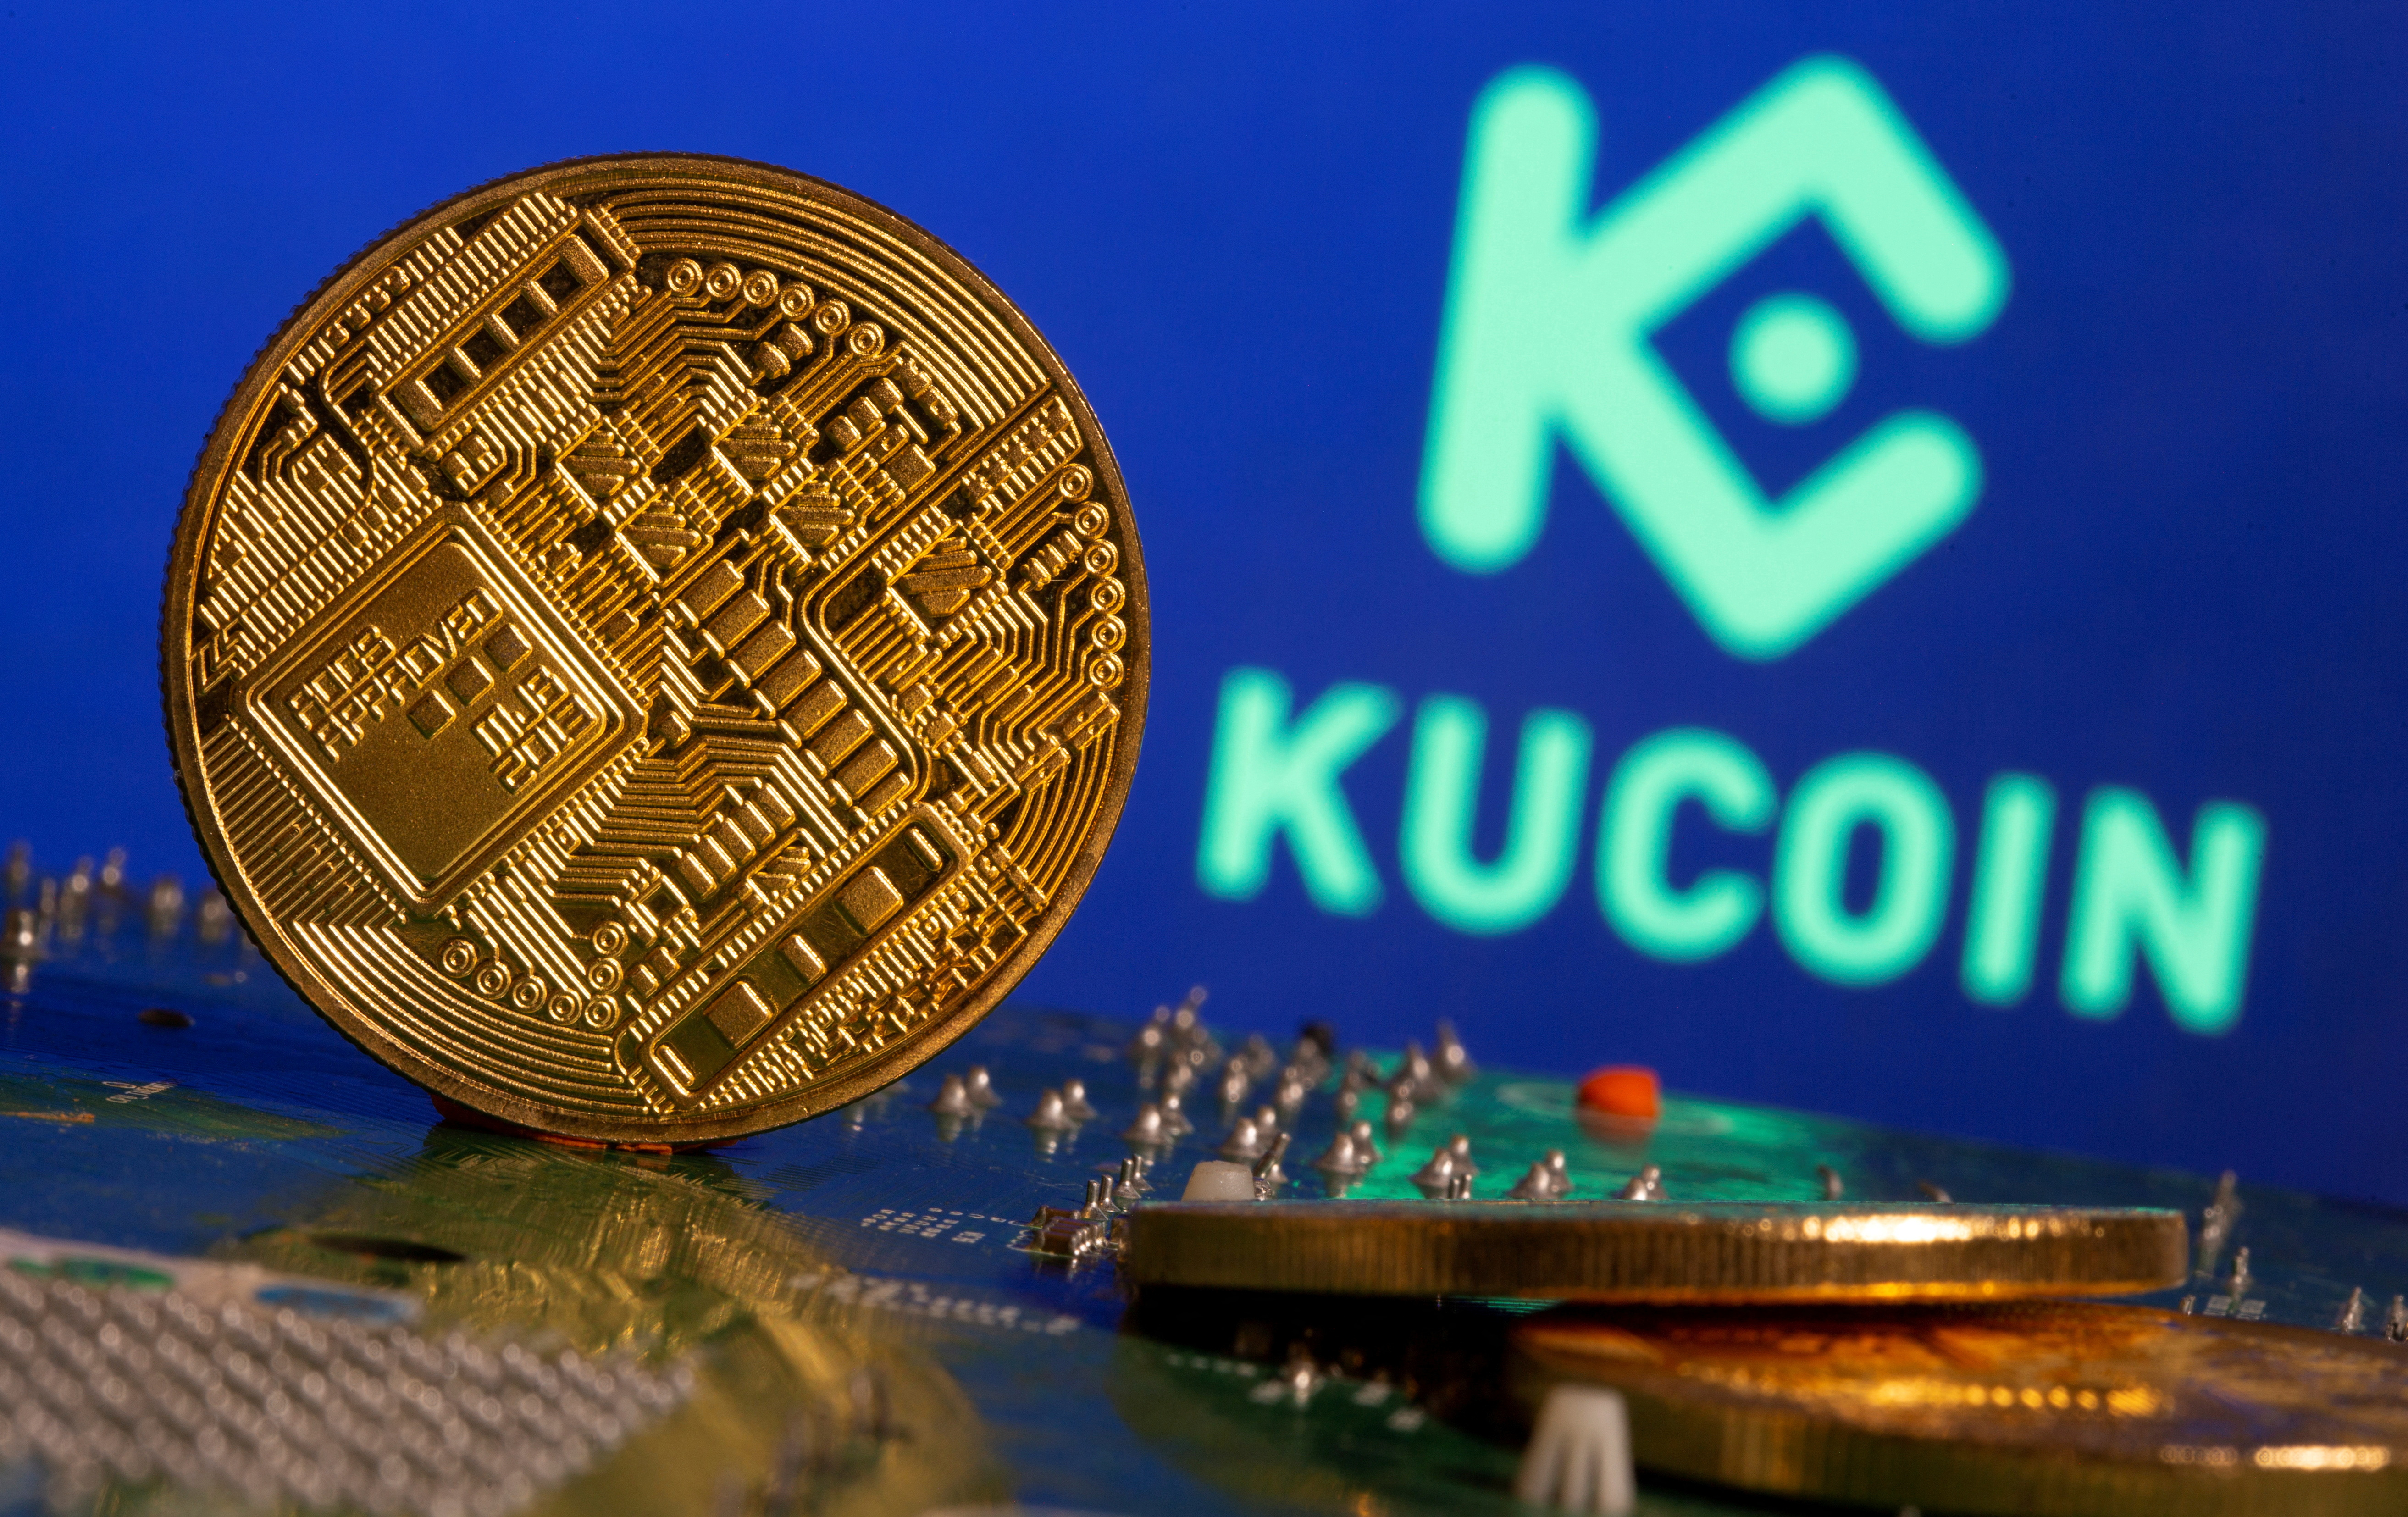 Representations of cryptocurrency is seen in front of a Kucoin logo in this illustration